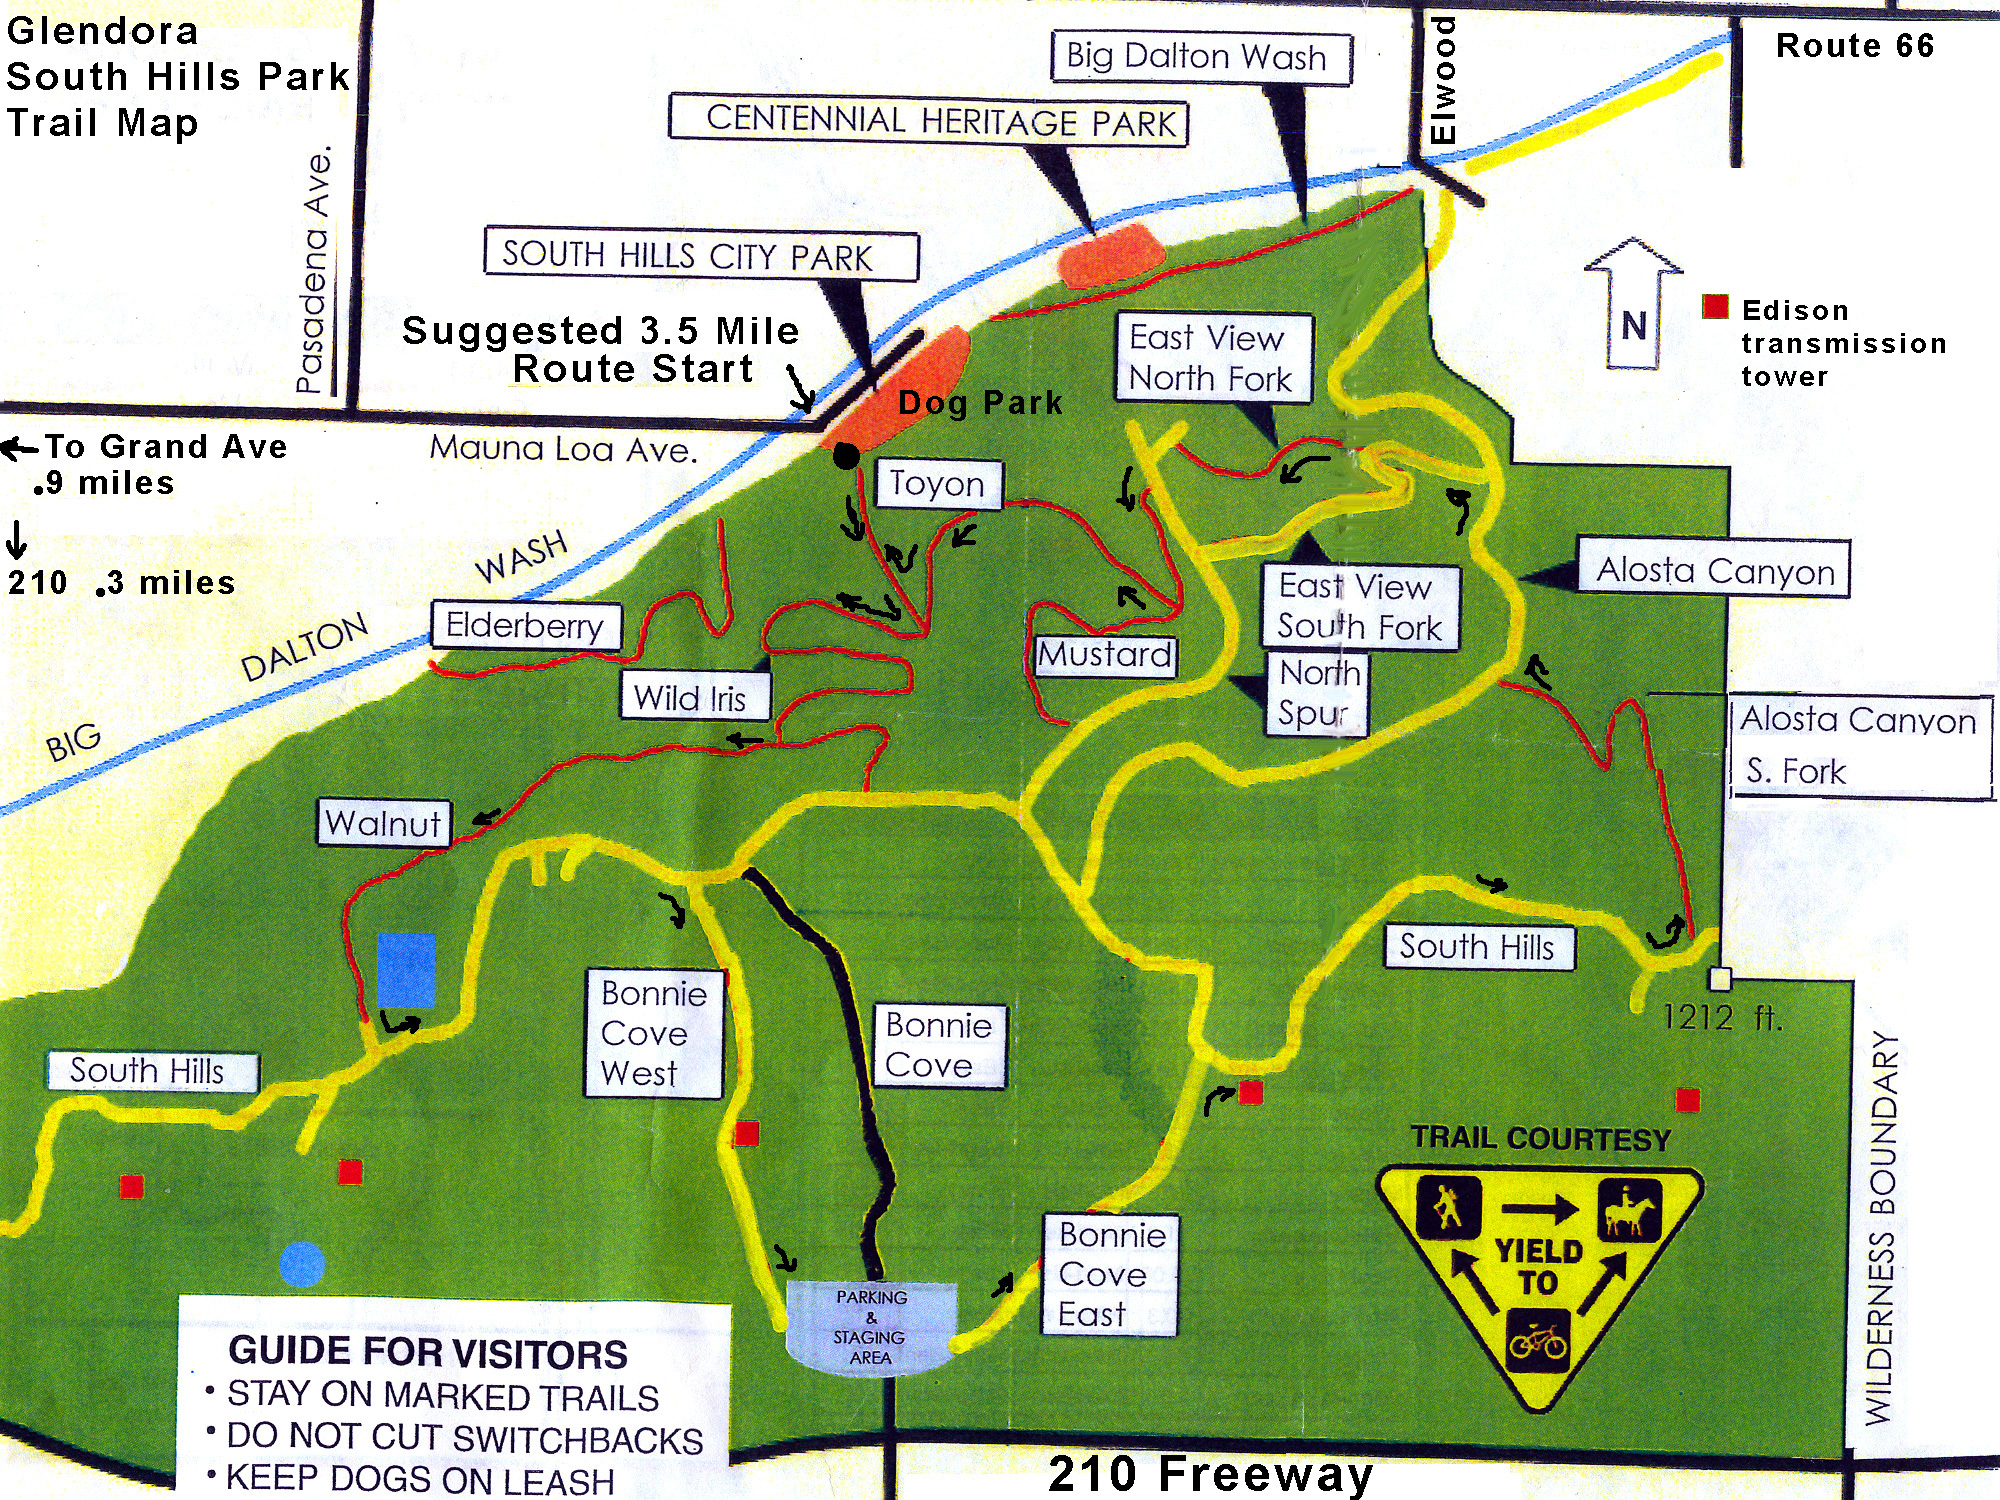 South Hills Trail Map